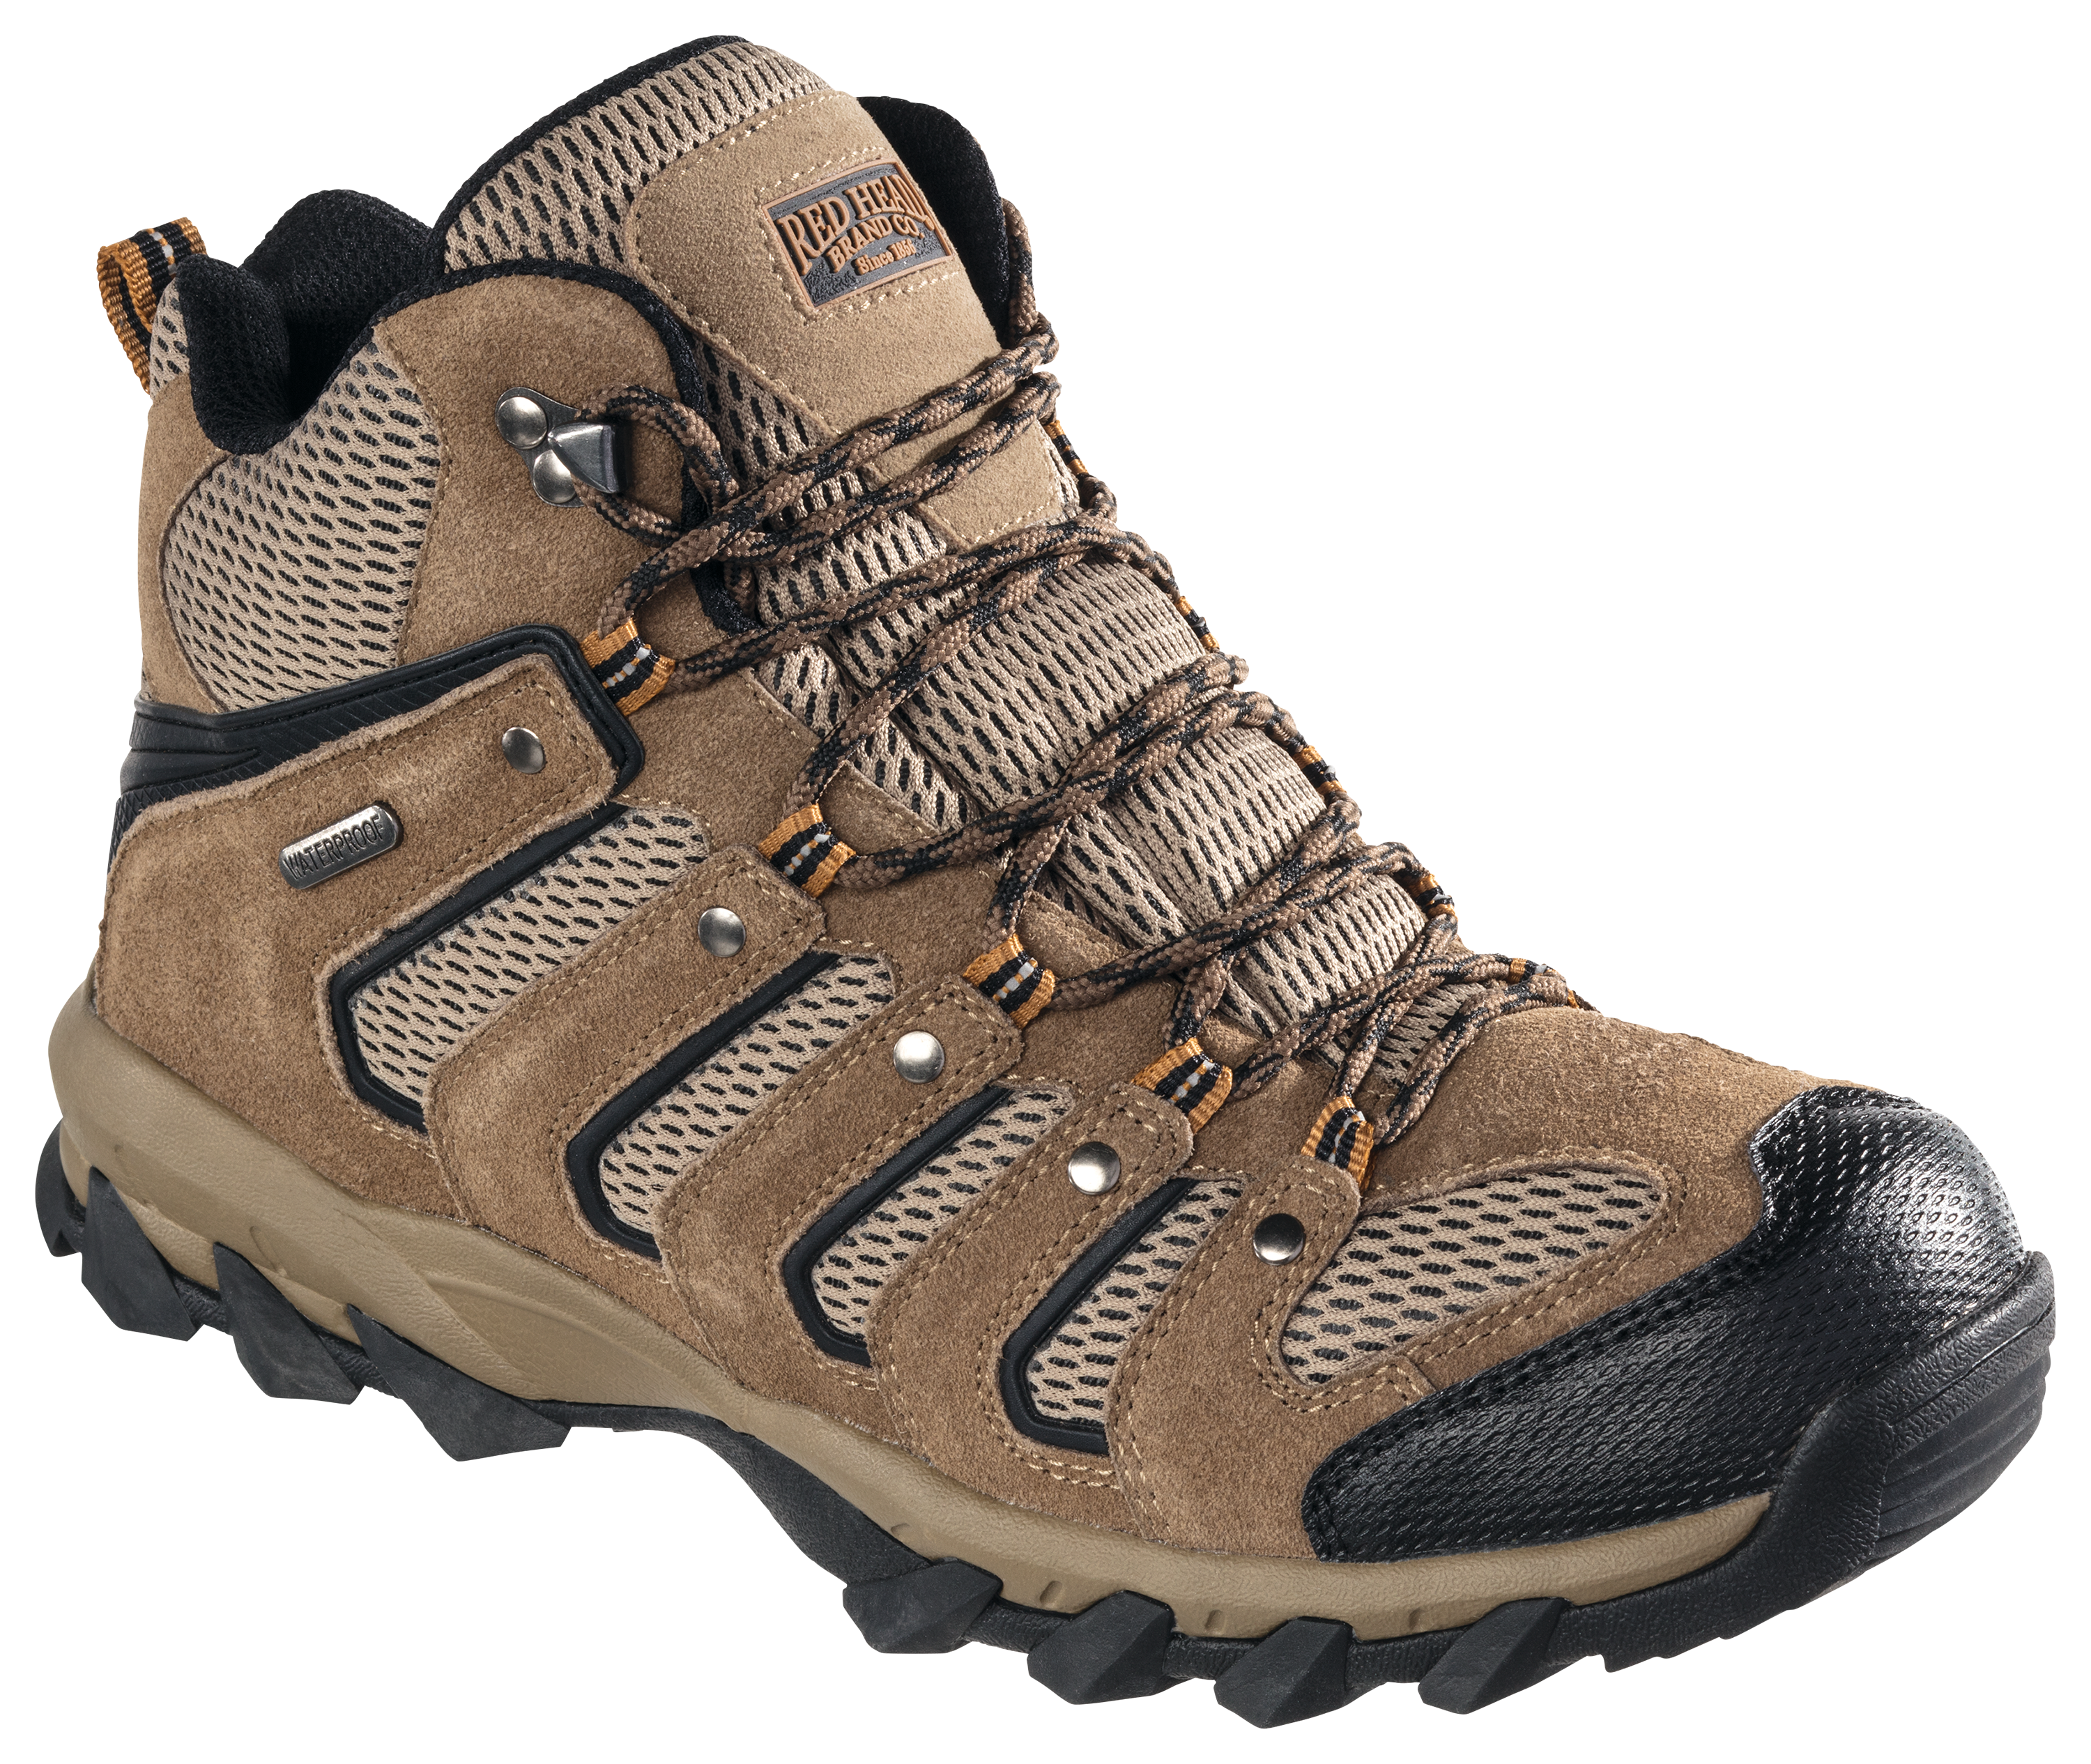 RedHead Front Range Hiking Boots for Men - Brown - 12M